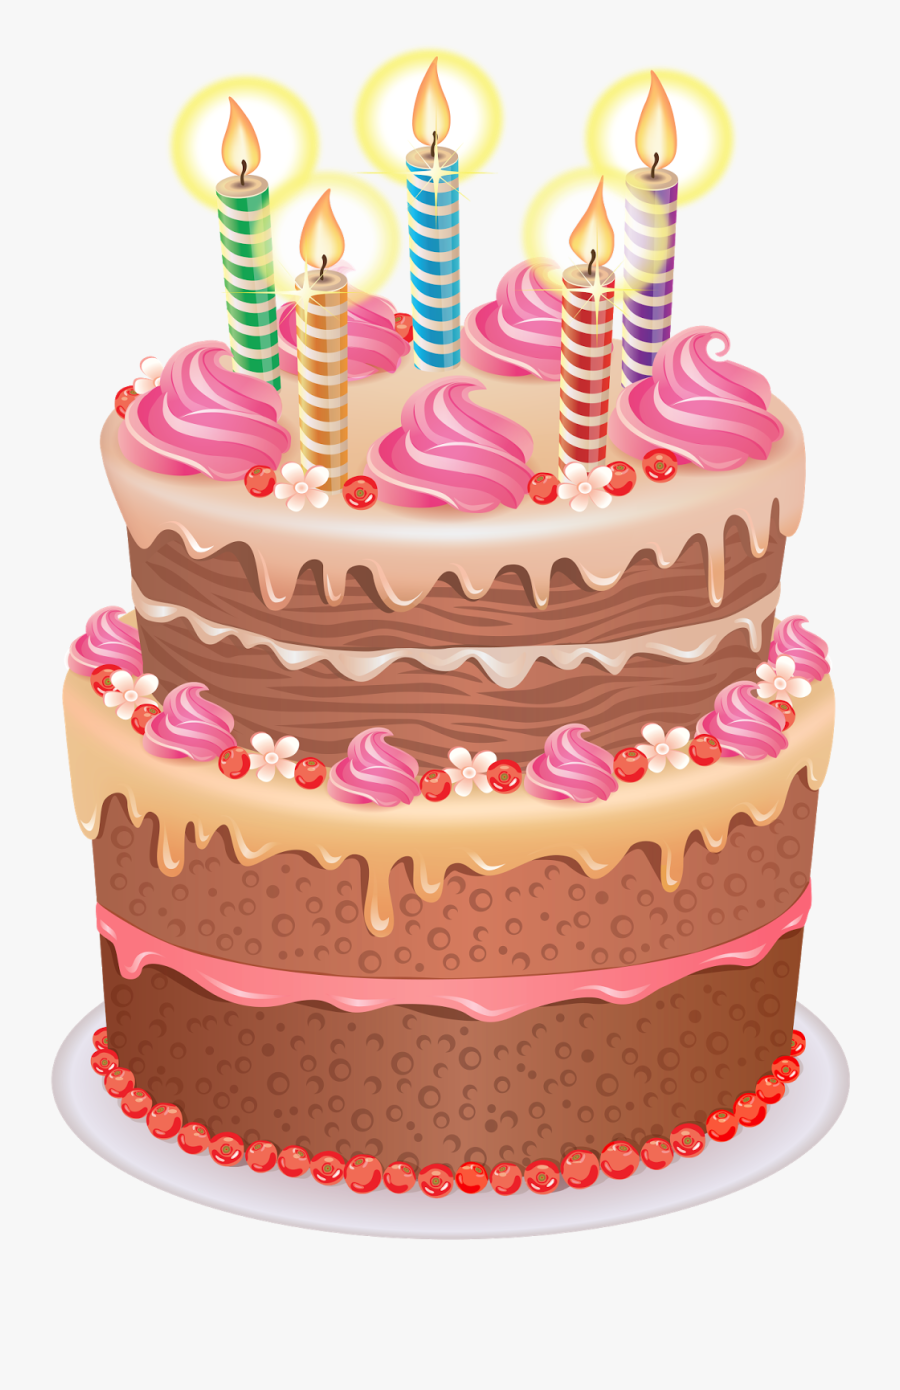 Clip Art Pin By Lawson On - Happy Birthday Cake Png, Transparent Clipart